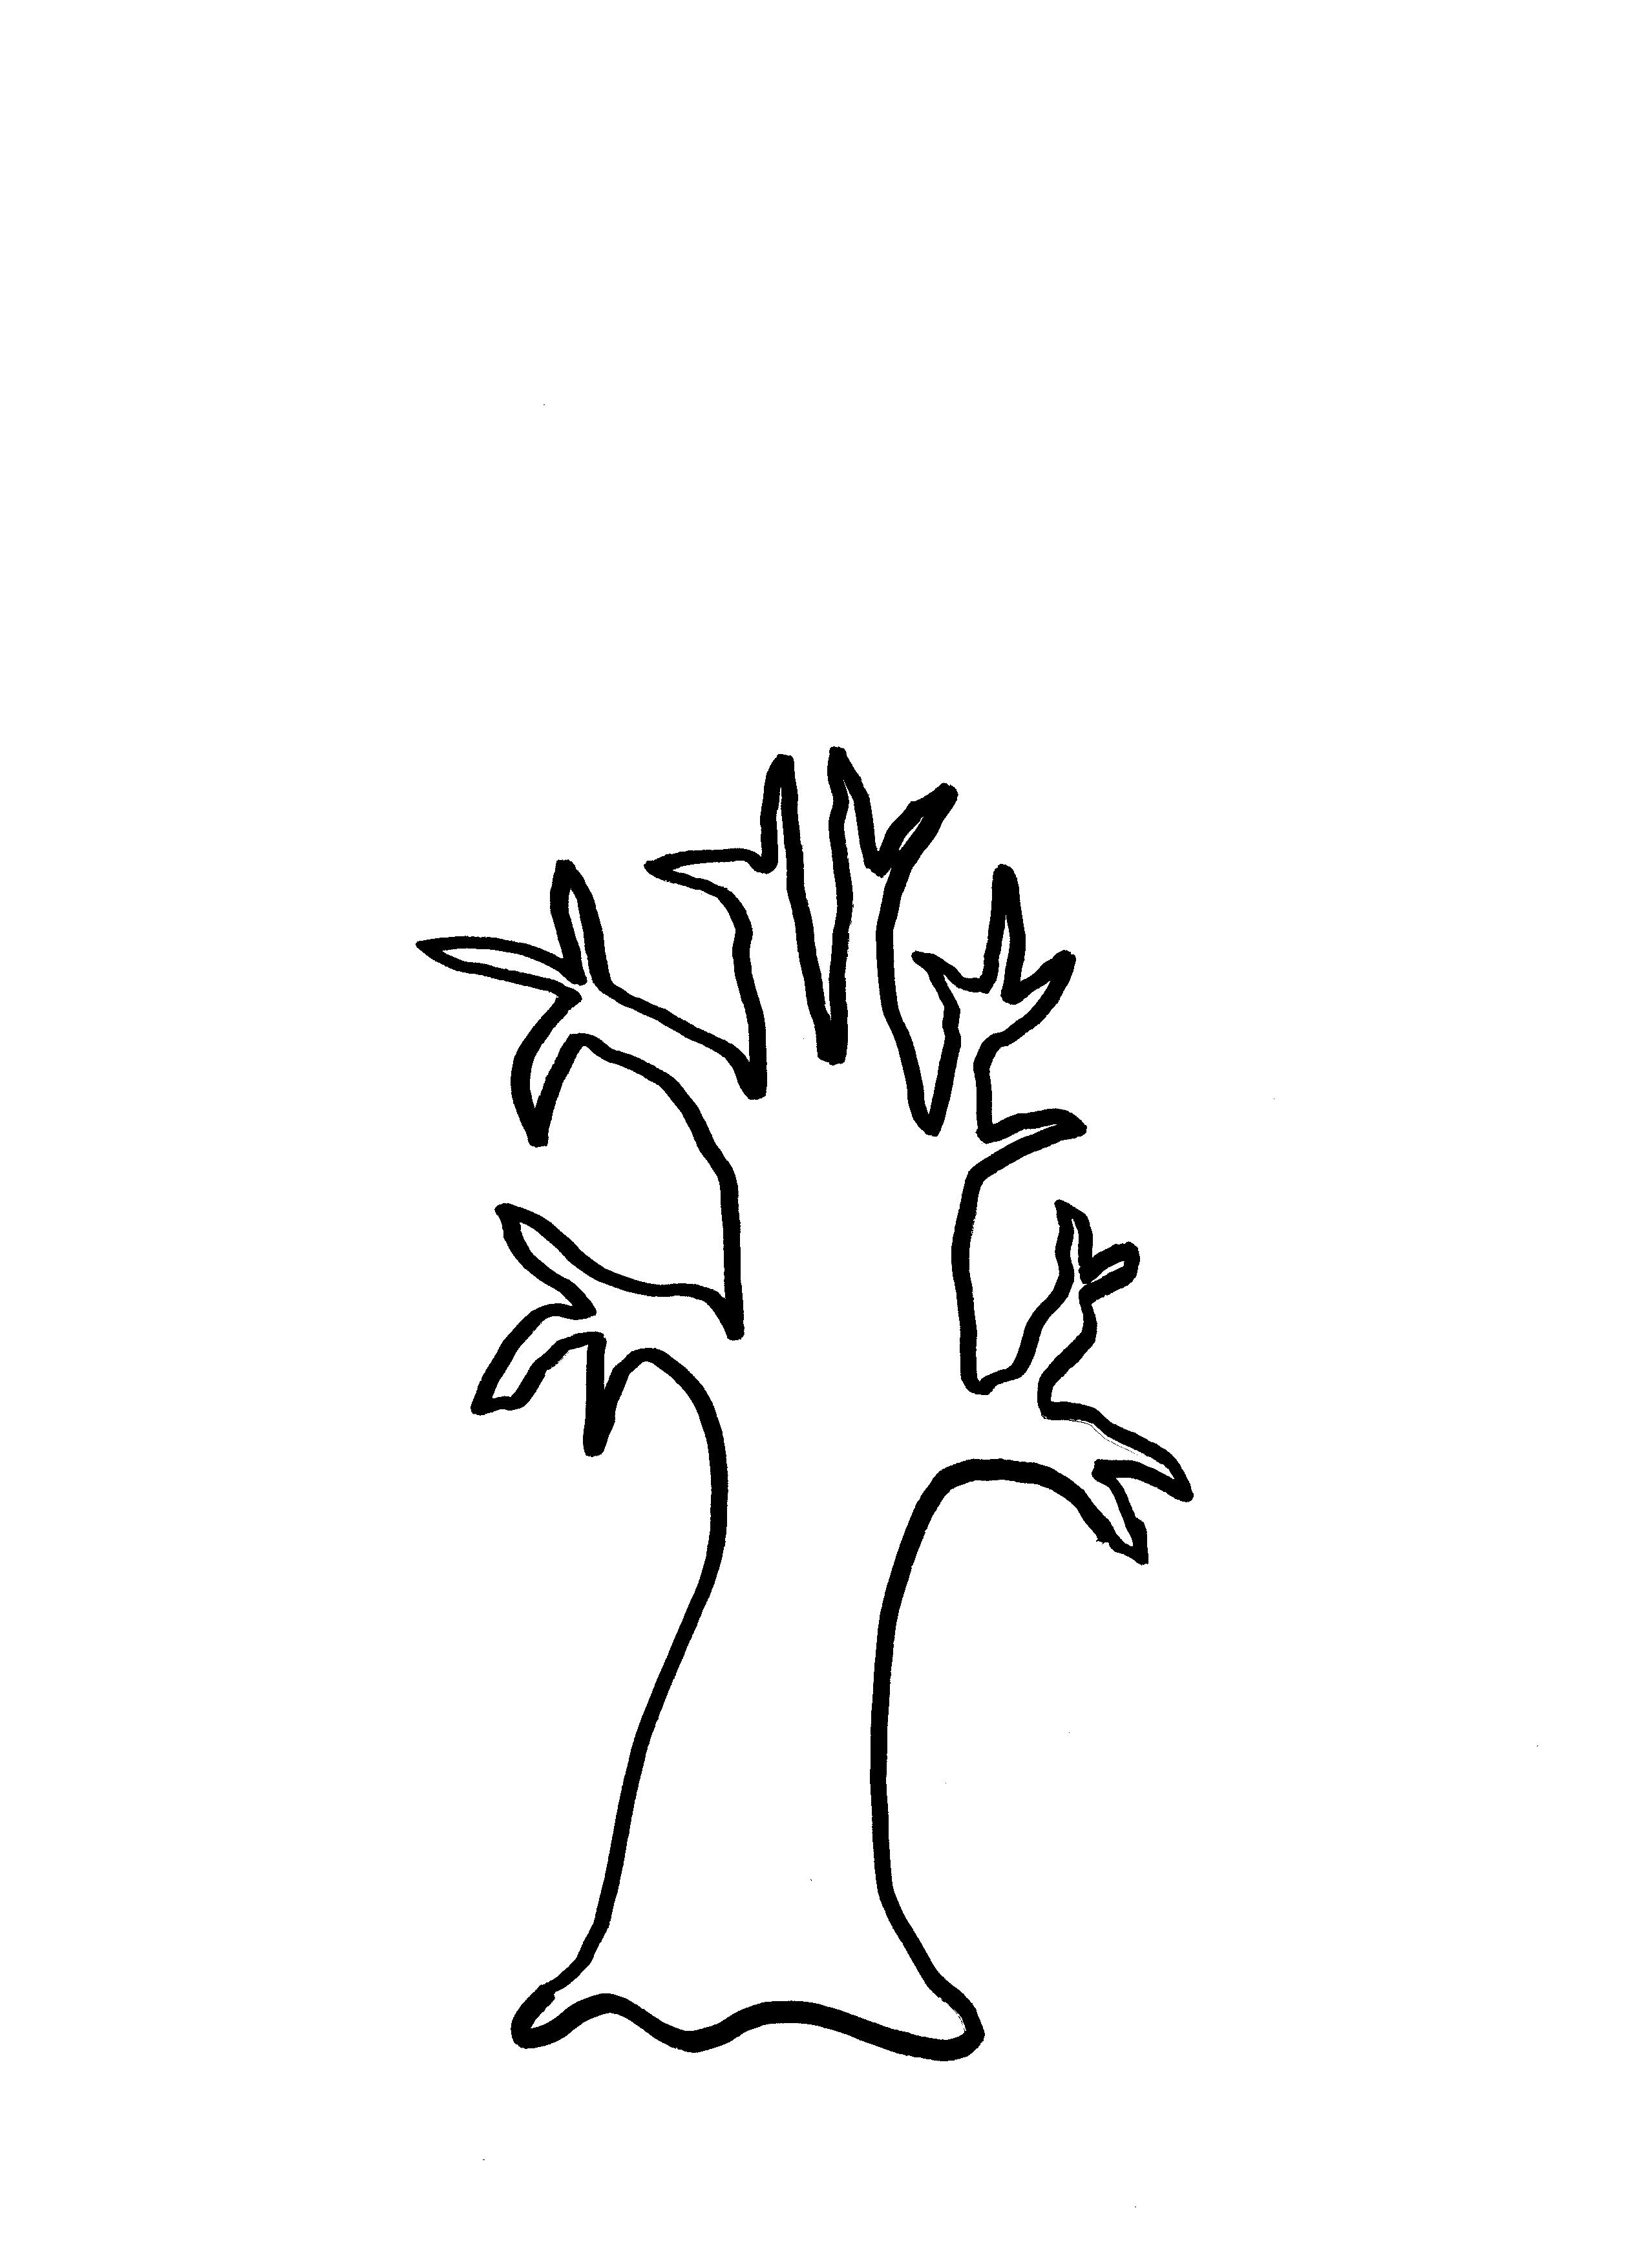 Tree Trunk Cartoon Black And White - ClipArt Best